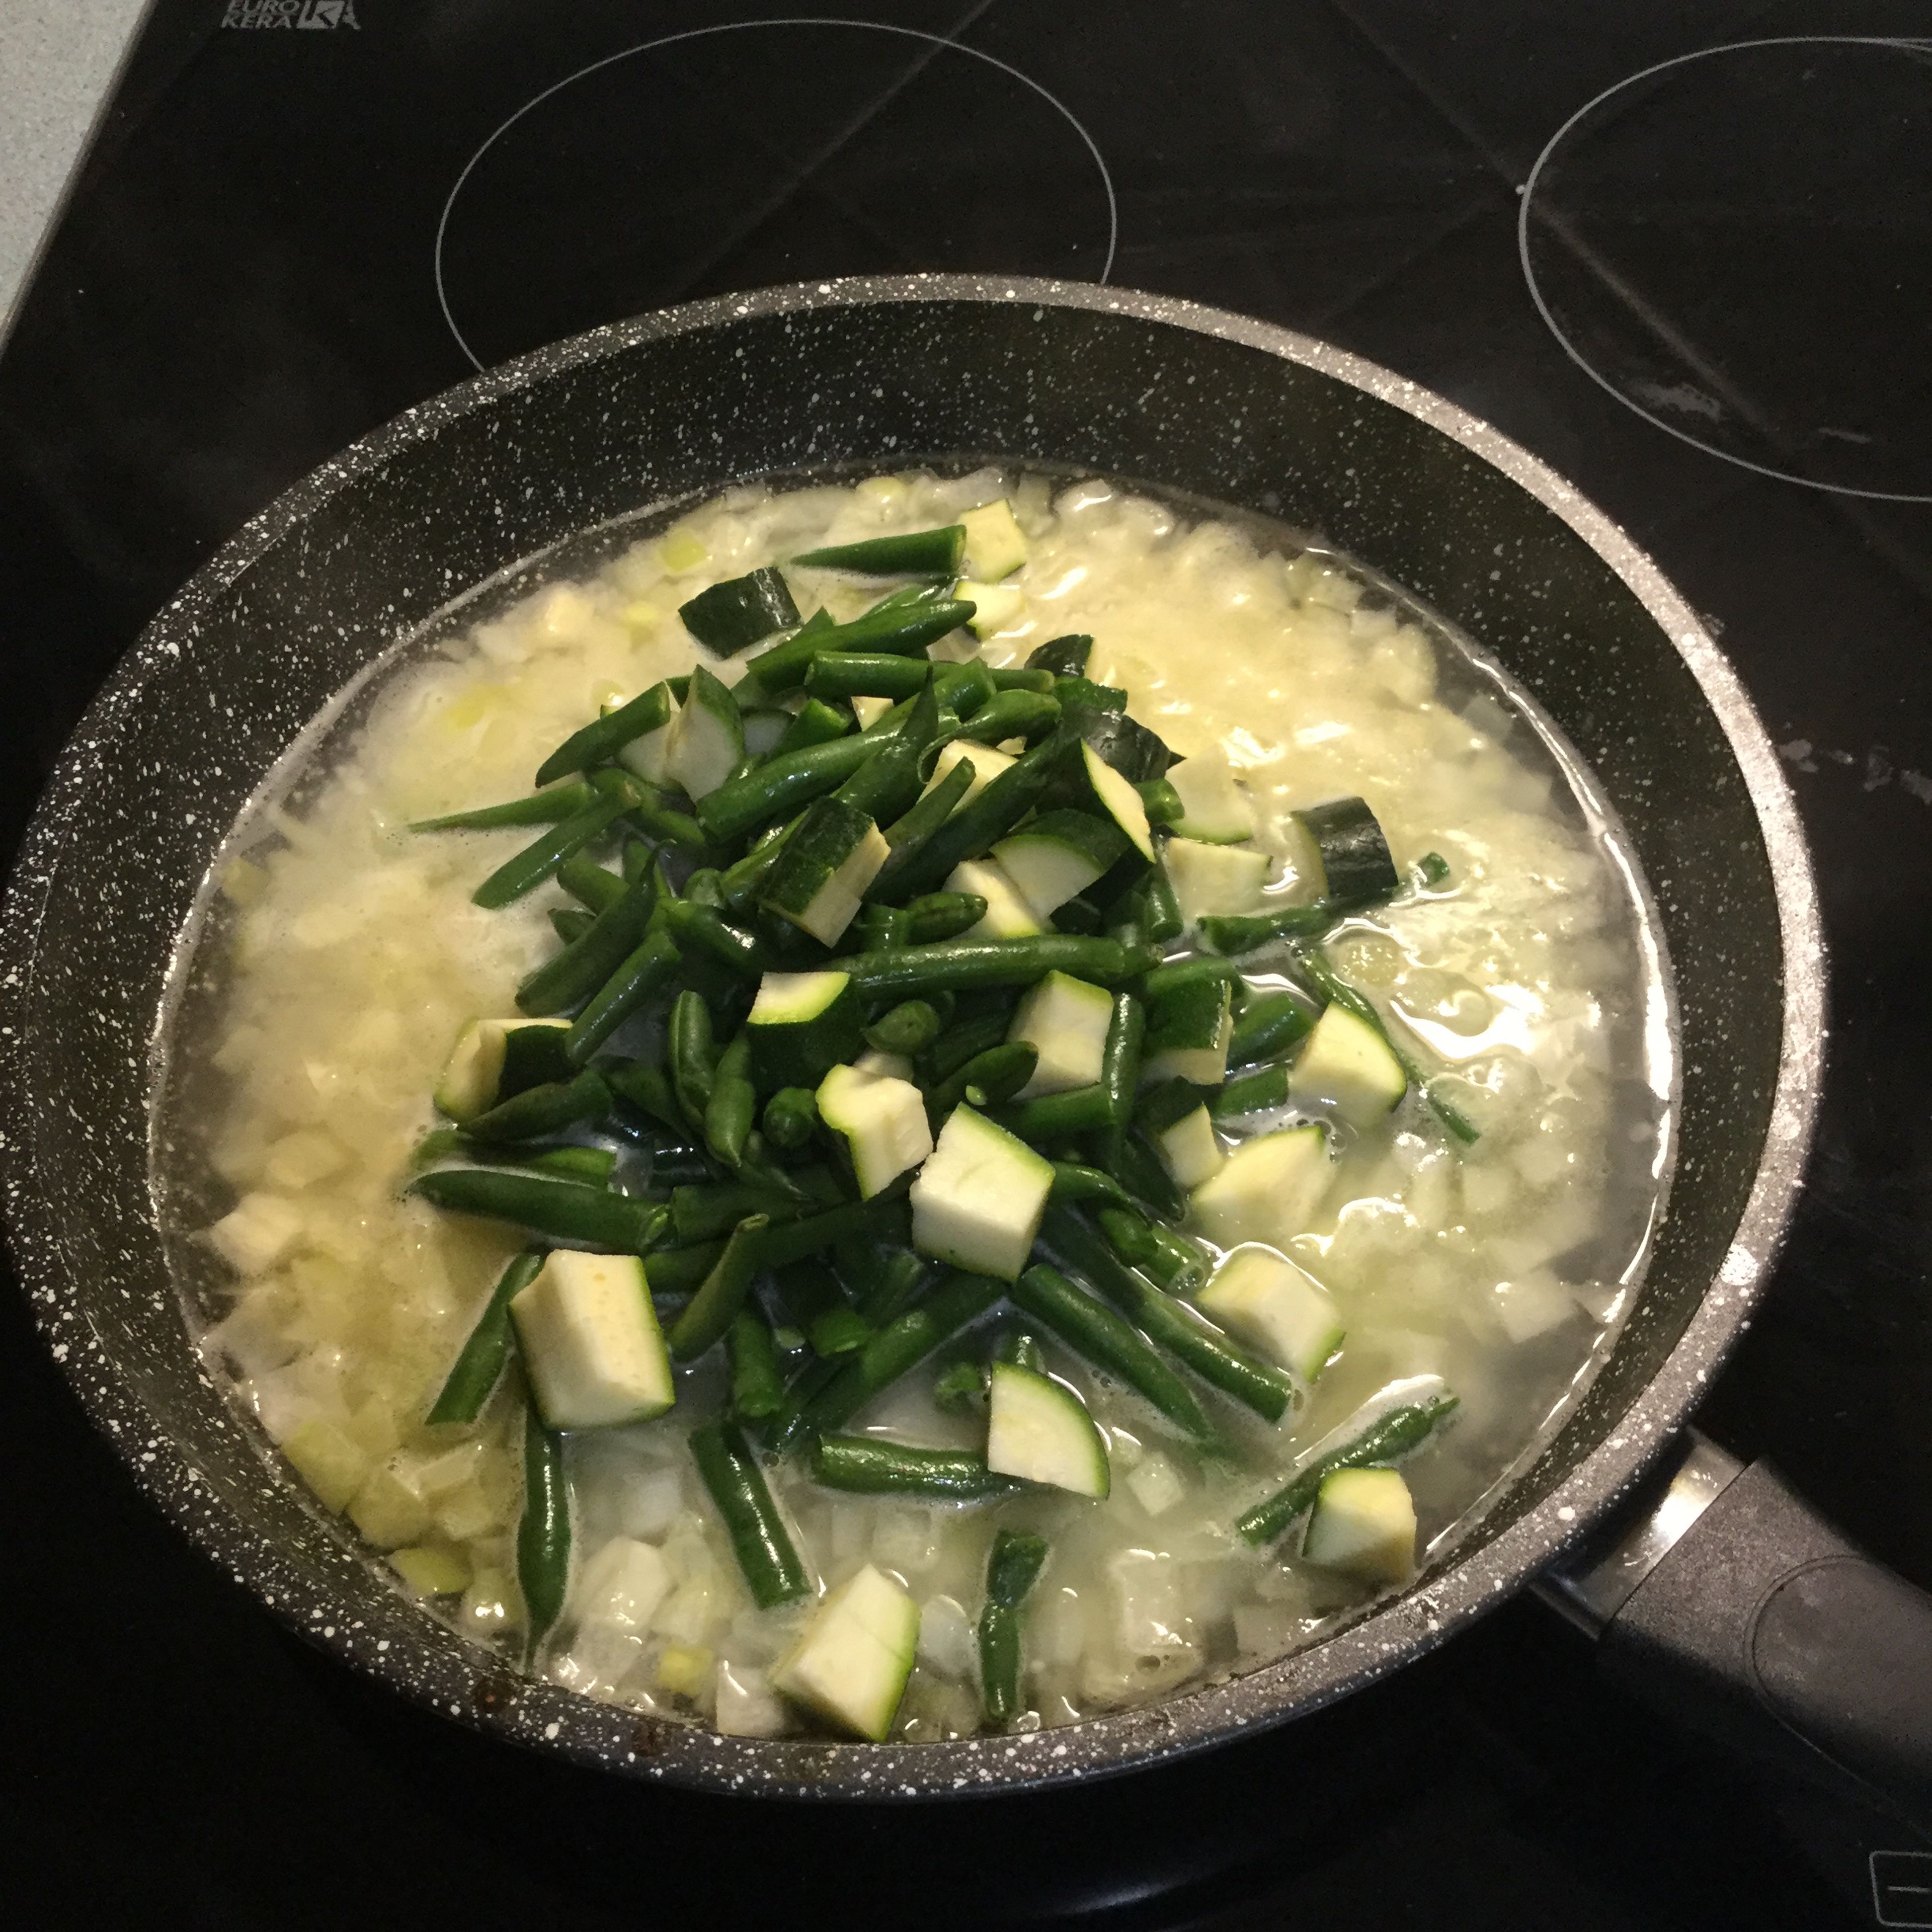 Heat a large frying pan and melt butter. Add the onion and cook until softened before adding the garlic. Add the arborio rice and stir to combine. Then, add two cups off water and leave to boil until first bubbles appear. When mixture starts boiling, add the chopped zucchini and beans.